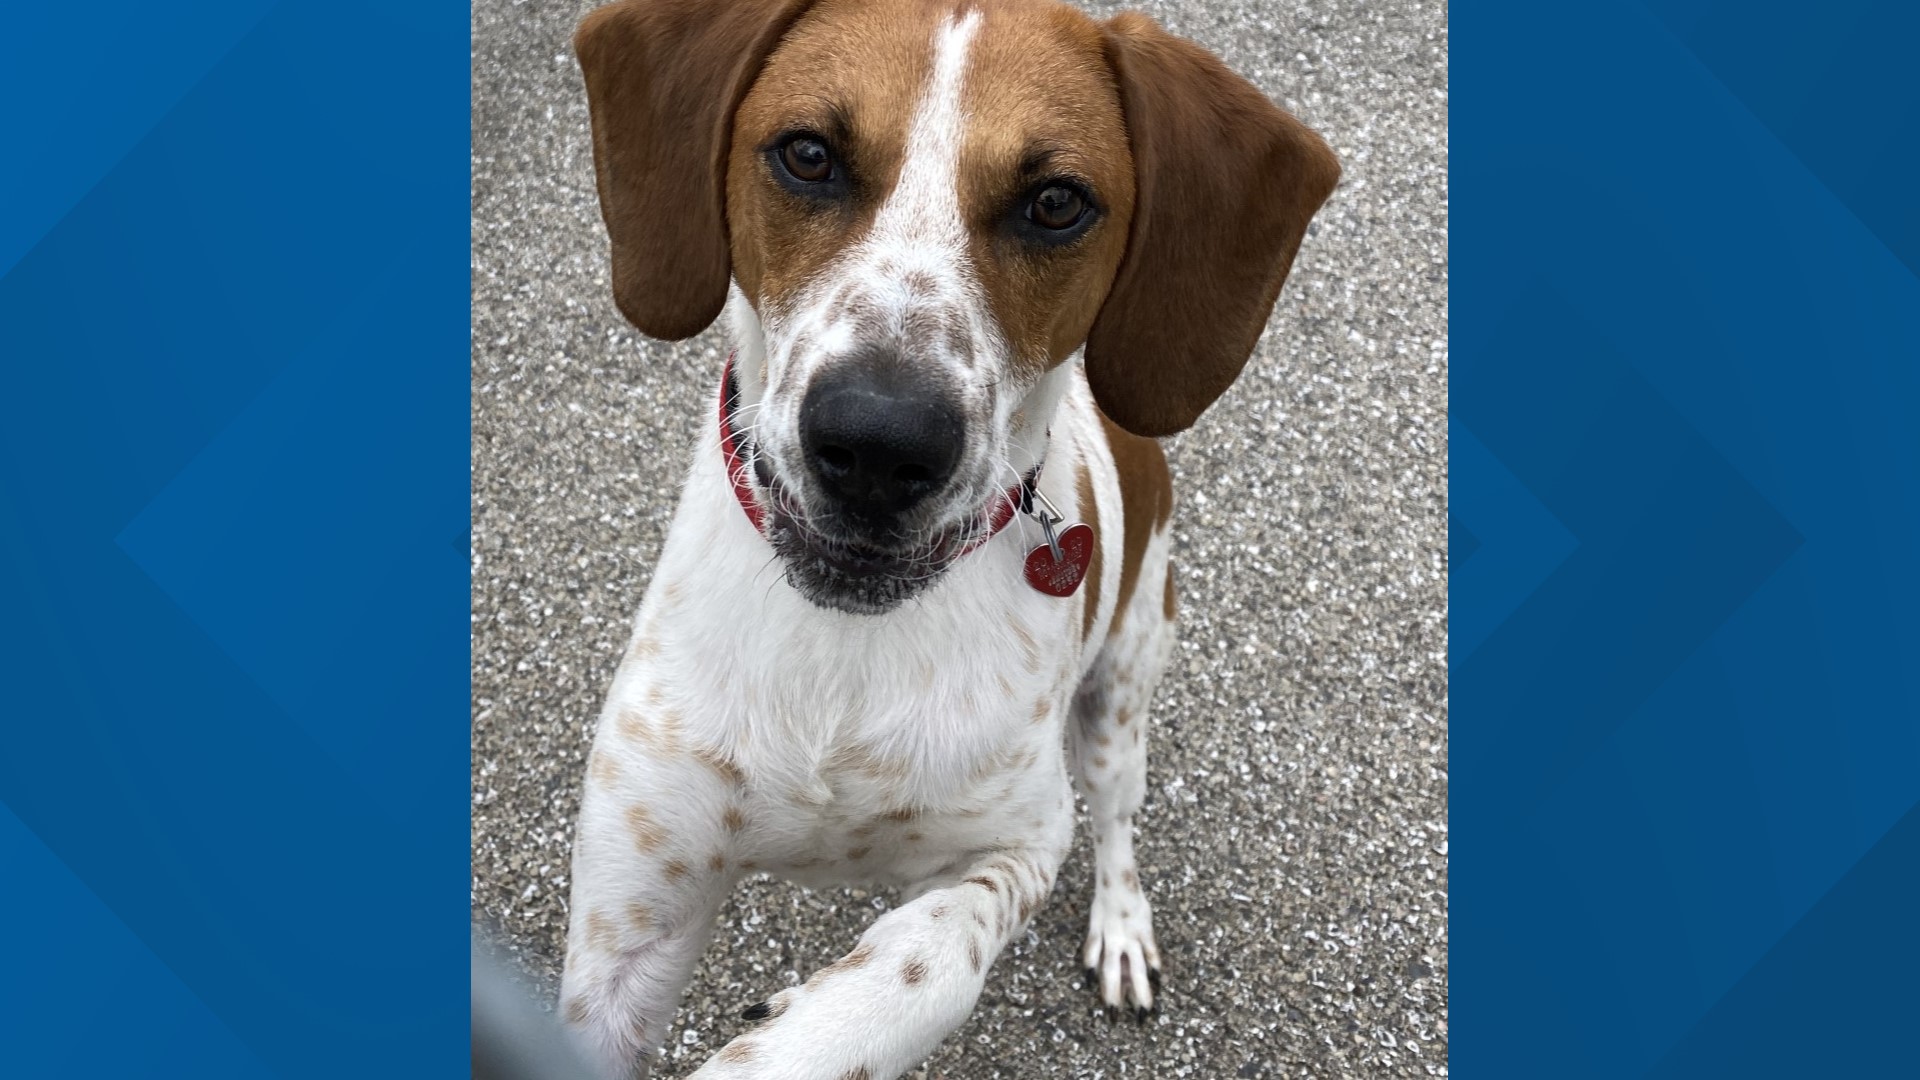 Cooper is a 2-year-old English Fox Hound looking for a 'furever' home.